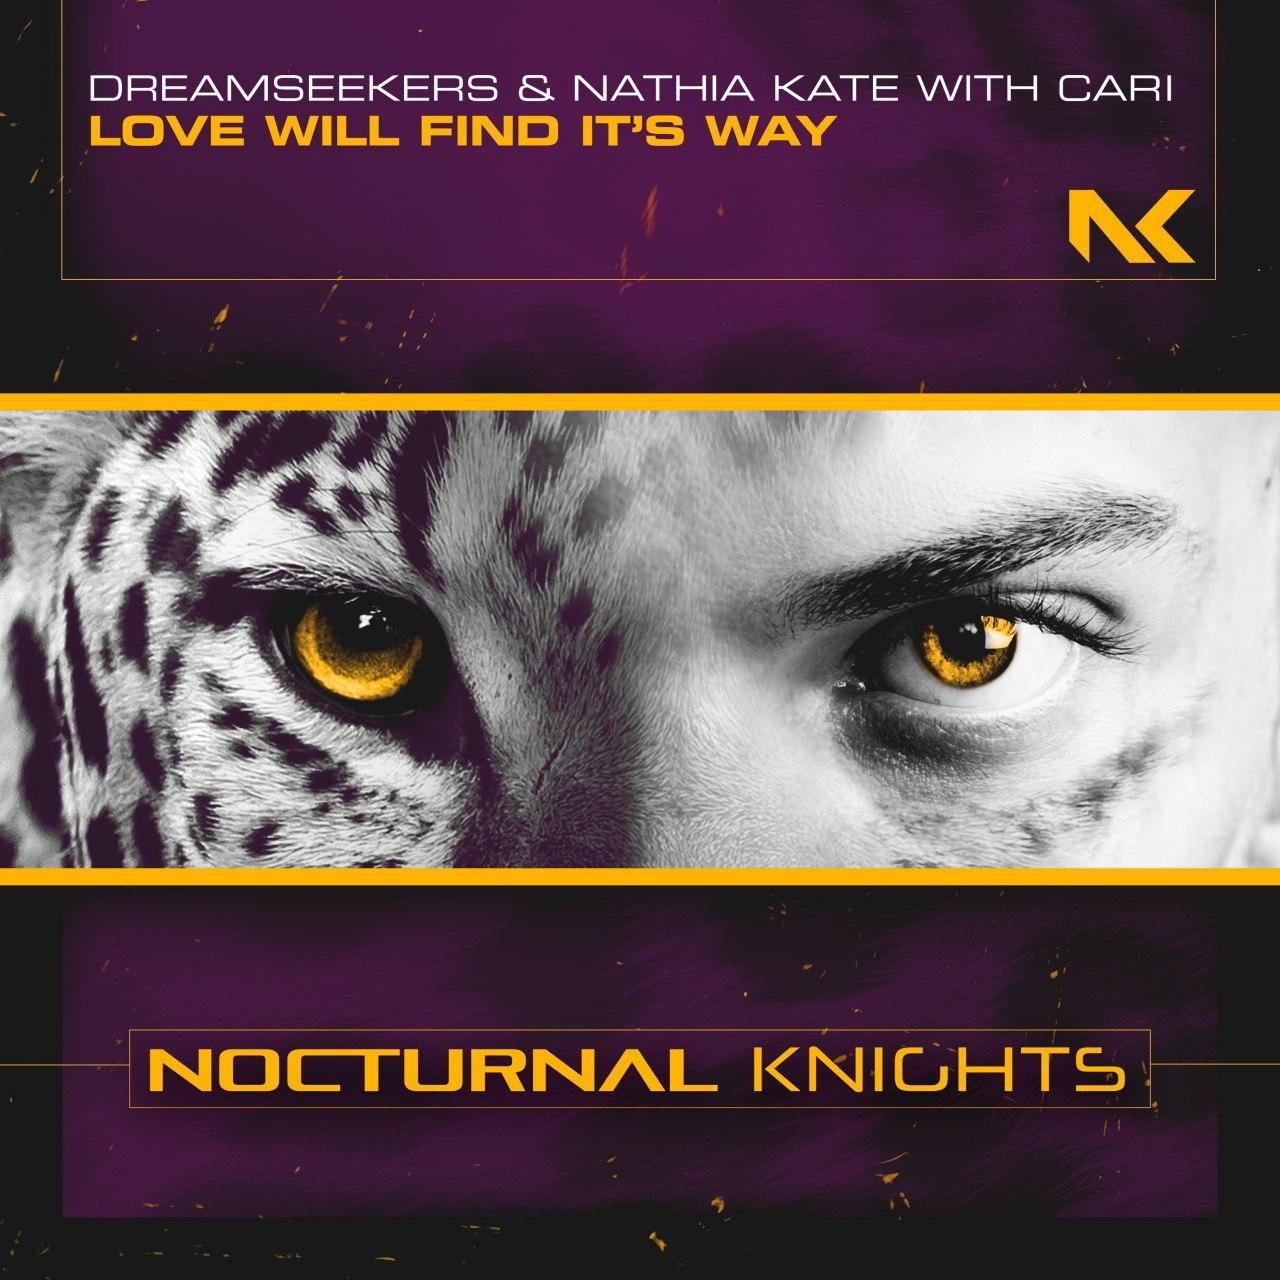 Dreamseekers & Nathia Kate with Cari - Love Will Find It's Way (Extended Mix)